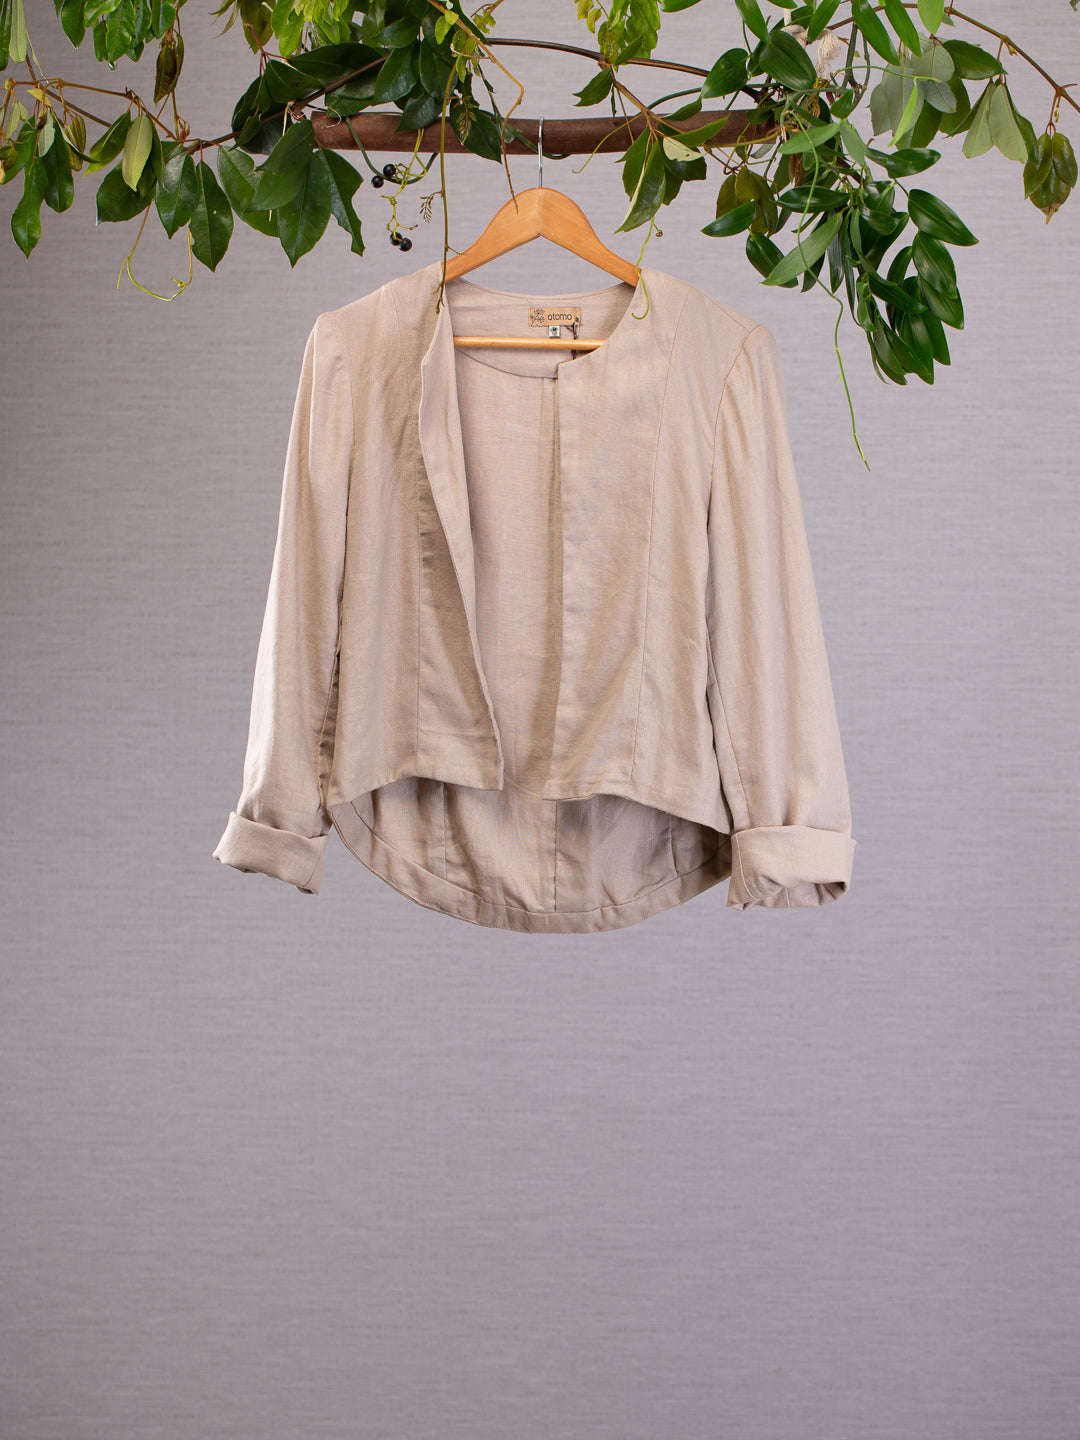 Refine your style with this tailored Otomo jacket, Made in 100% Linen the designer panelling gives this cream jacket a minimalist look. Cream jacket hanging from vines with it's sleeves rolled up.